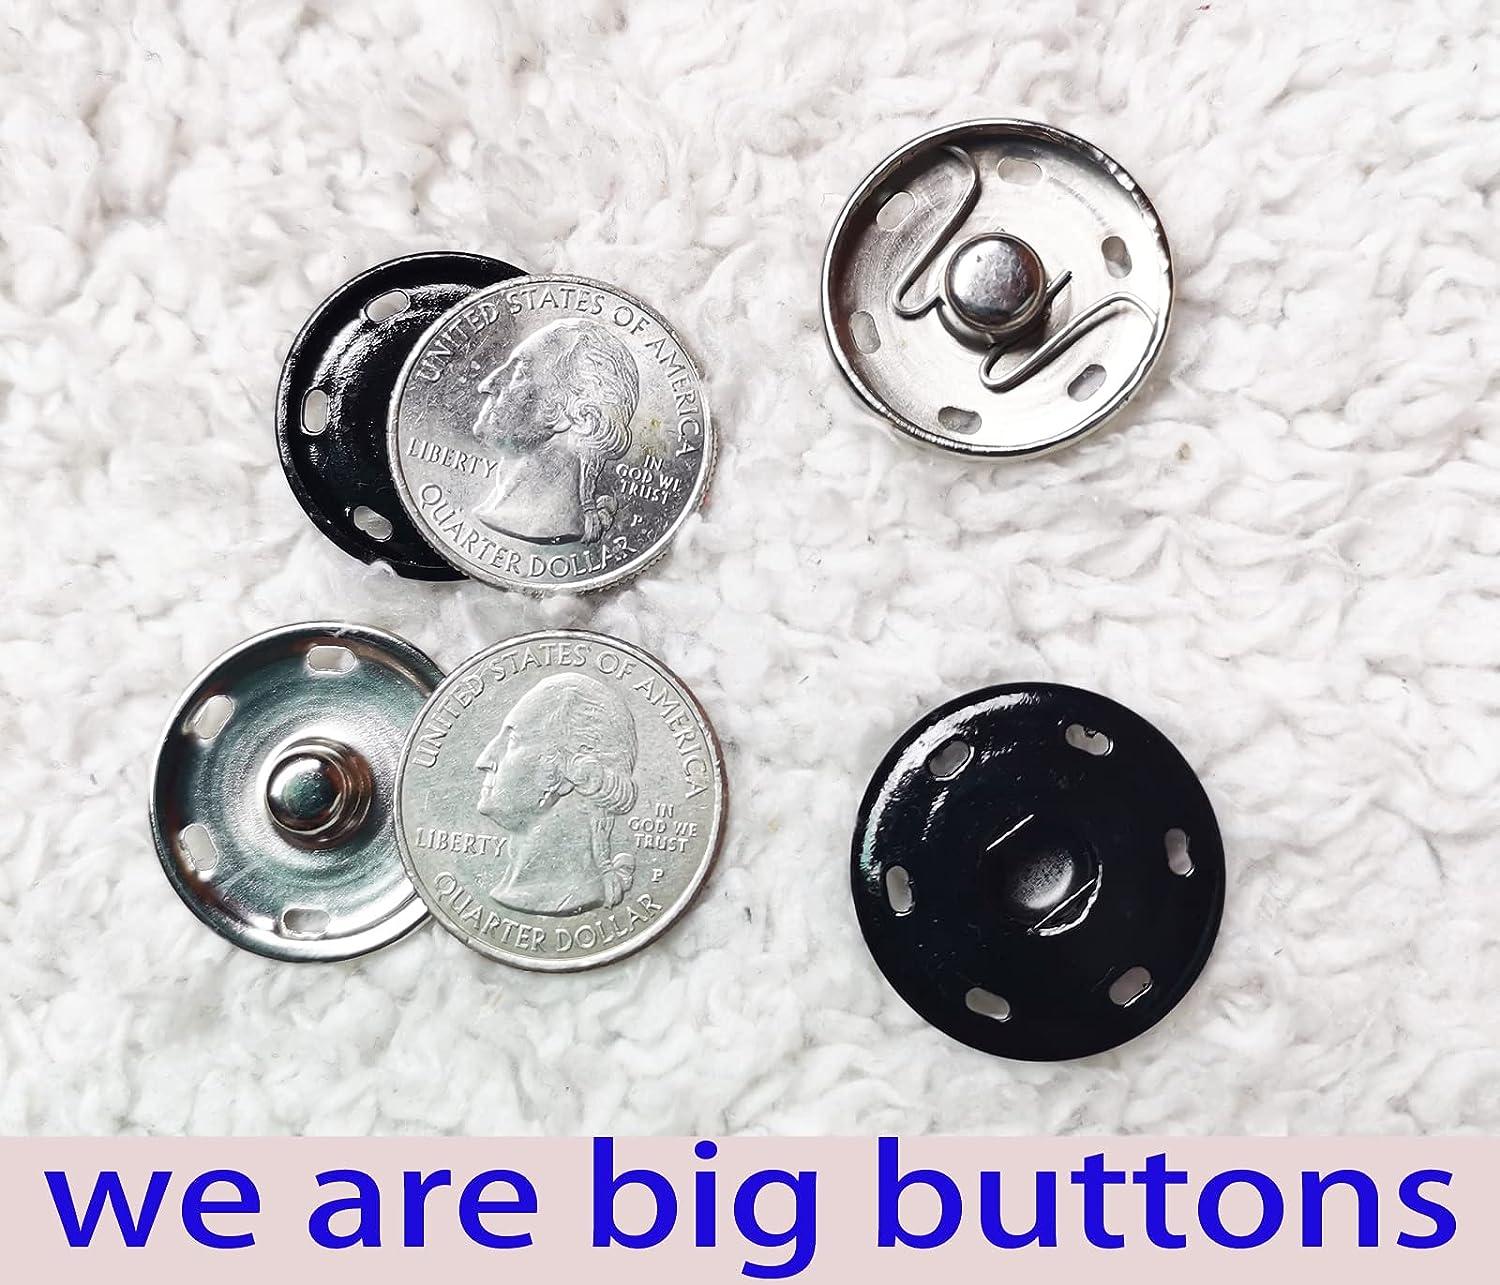 Wefab Press Buttons Push Button 200 Pcs (snap Fasteners) Studs Popper Button  - Bra, Buttons, Brass Rust Proof Superior Guide Hole For Craft And Sewing,  Prong Snap Button, रिंग स्नैप बटन 